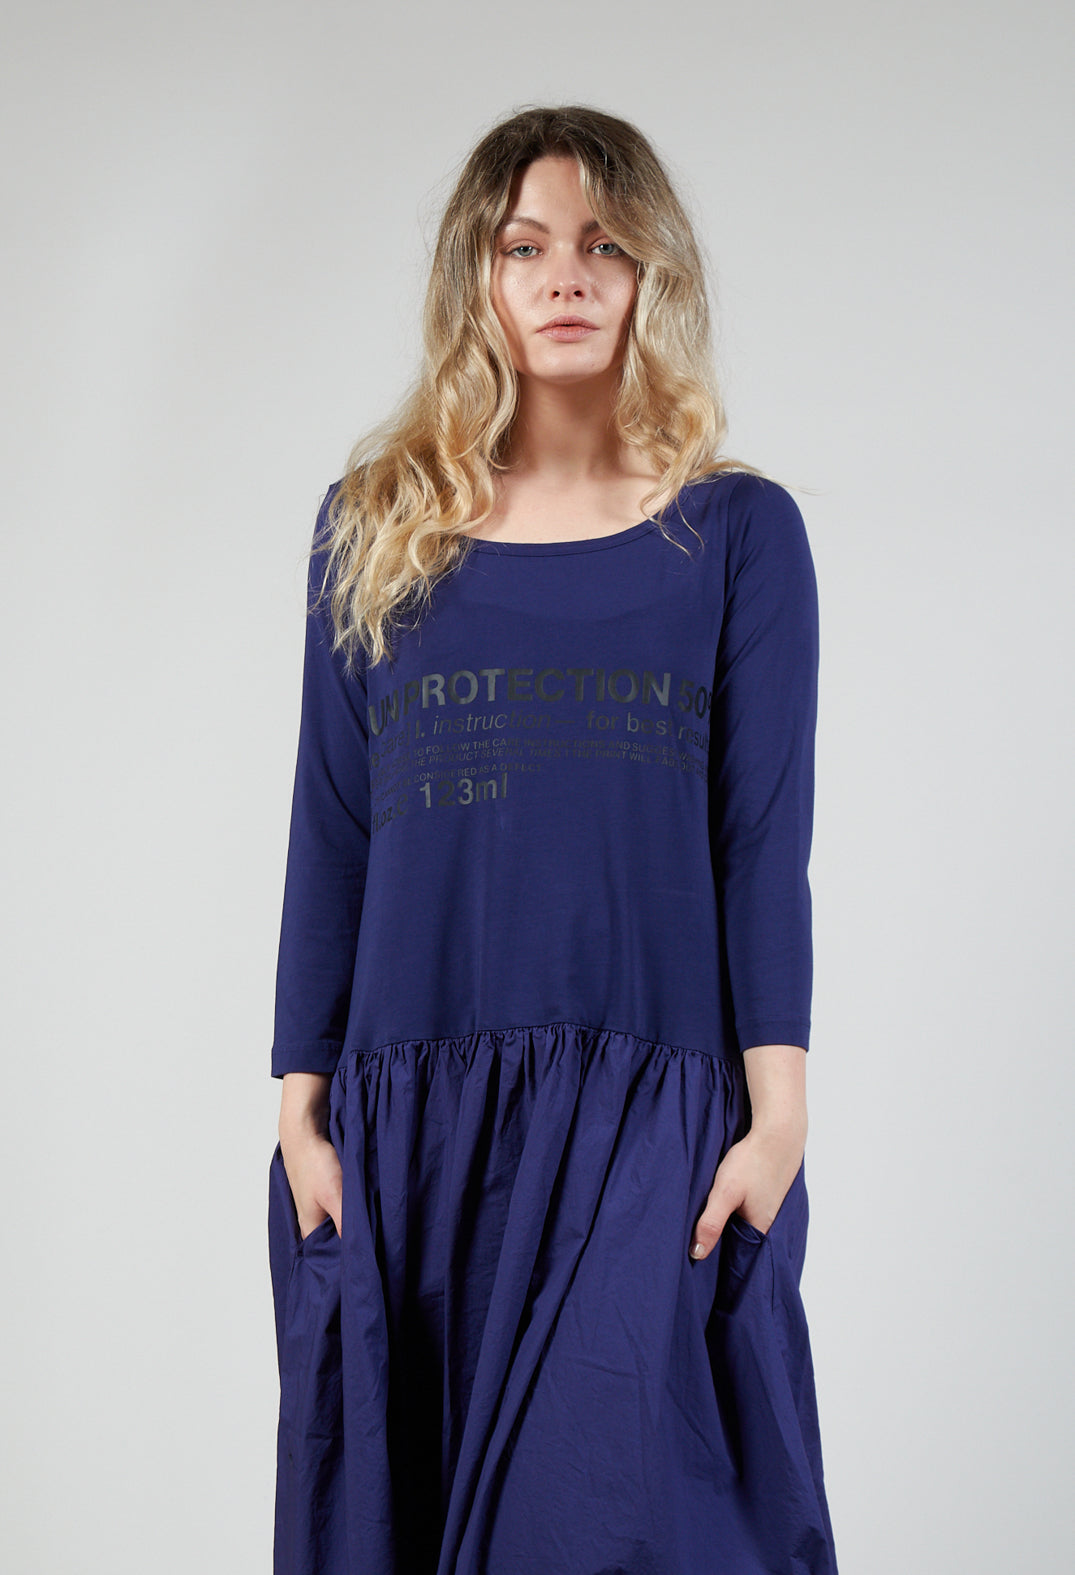 Jersey Top Dress with Lettering Motif in Azur Print